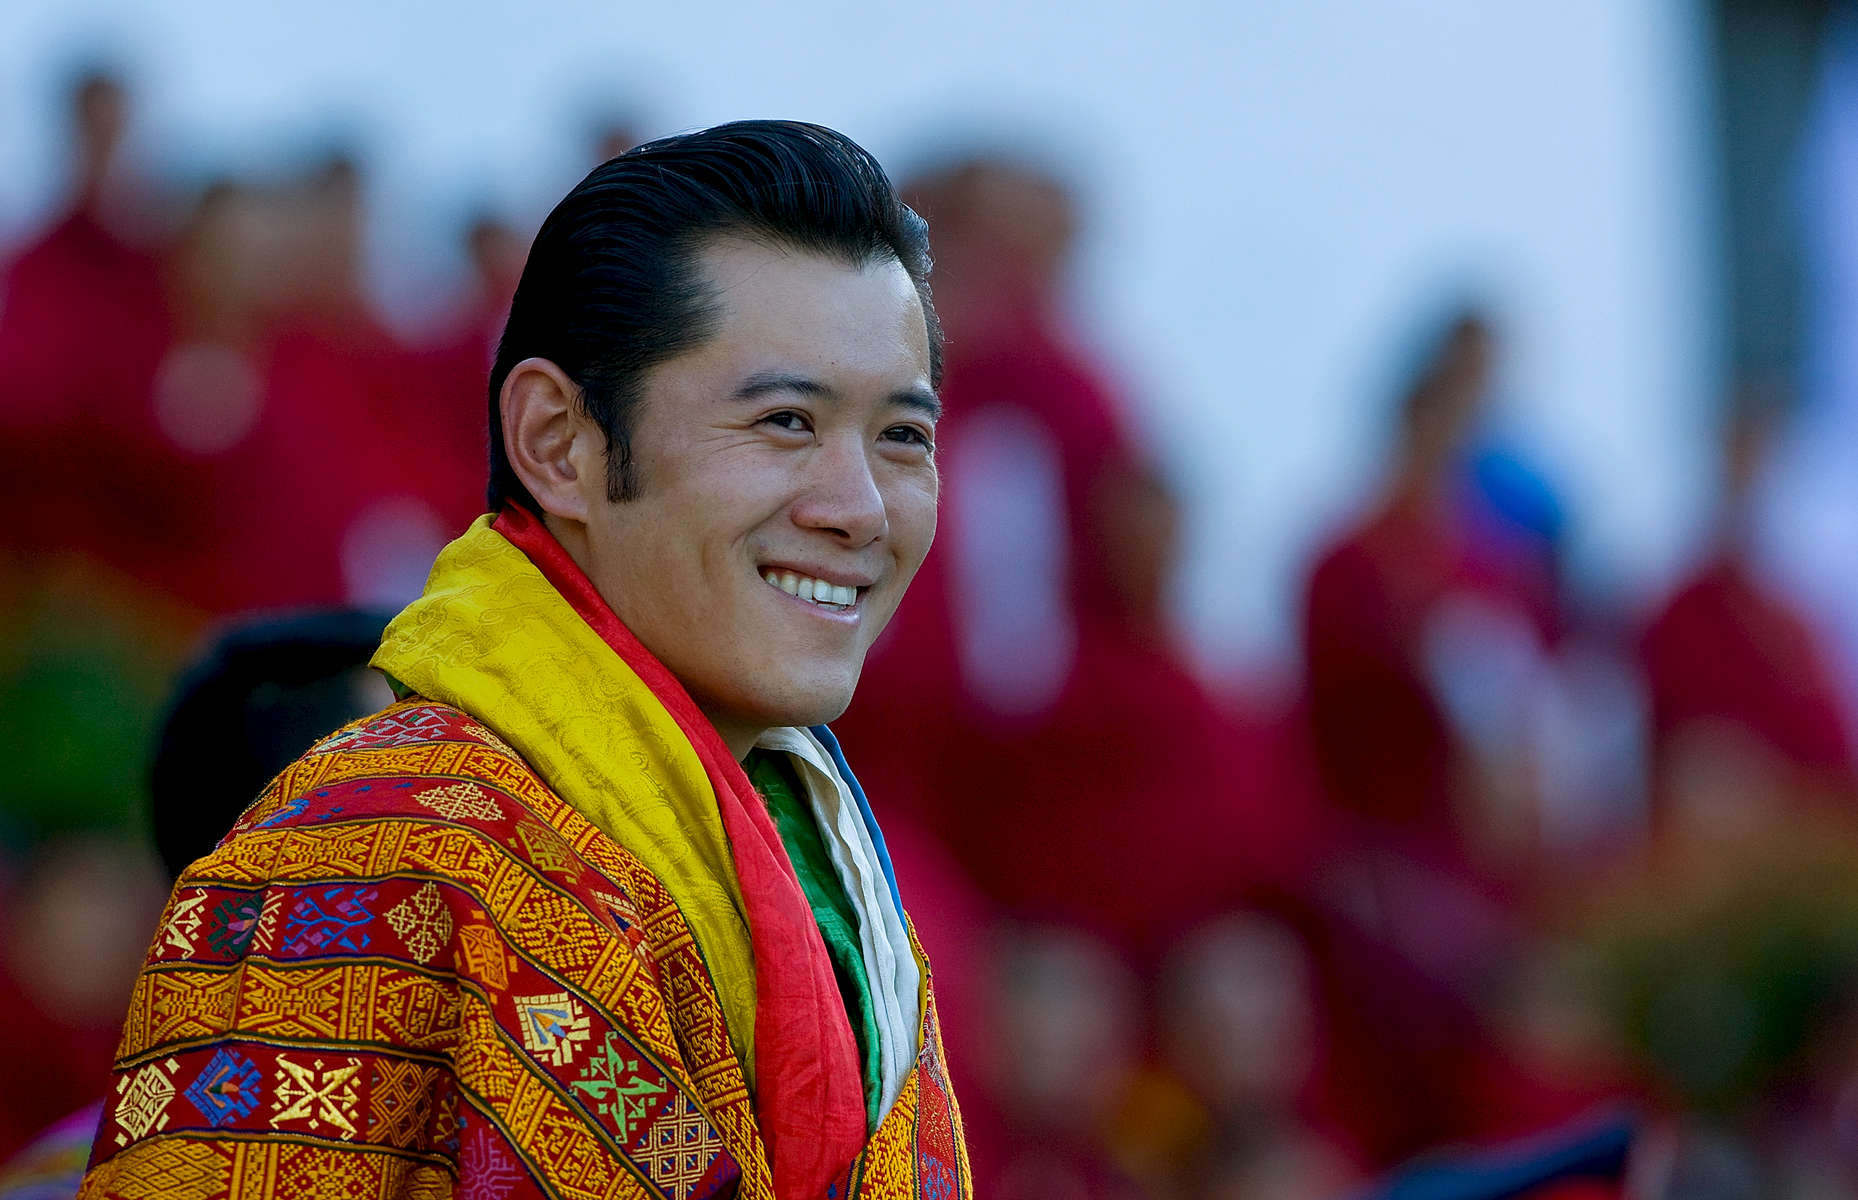 THIMPHU, BHUTAN -NOV 6, 2008: His Majesty Jigme Khesar Namgyel Wangchuck, 28, smiles towards his people at the ceremonial grounds of The  Tendrey Thang November 6, 2008 in Thimphu, Bhutan. The young Bhutanese king, anOxford-educated bachelor became the youngest reigning monarch on the planet today. He was handed the Raven Crown by his father, the former King Jigme Singye Wangchuck, in an ornate ceremony in Thimpu, the capital. The tiny Himalayan kingdom, a Buddhist nation of 635,000 people is wedged between China and India .  (Photo by Paula Bronstein/Getty Images) 